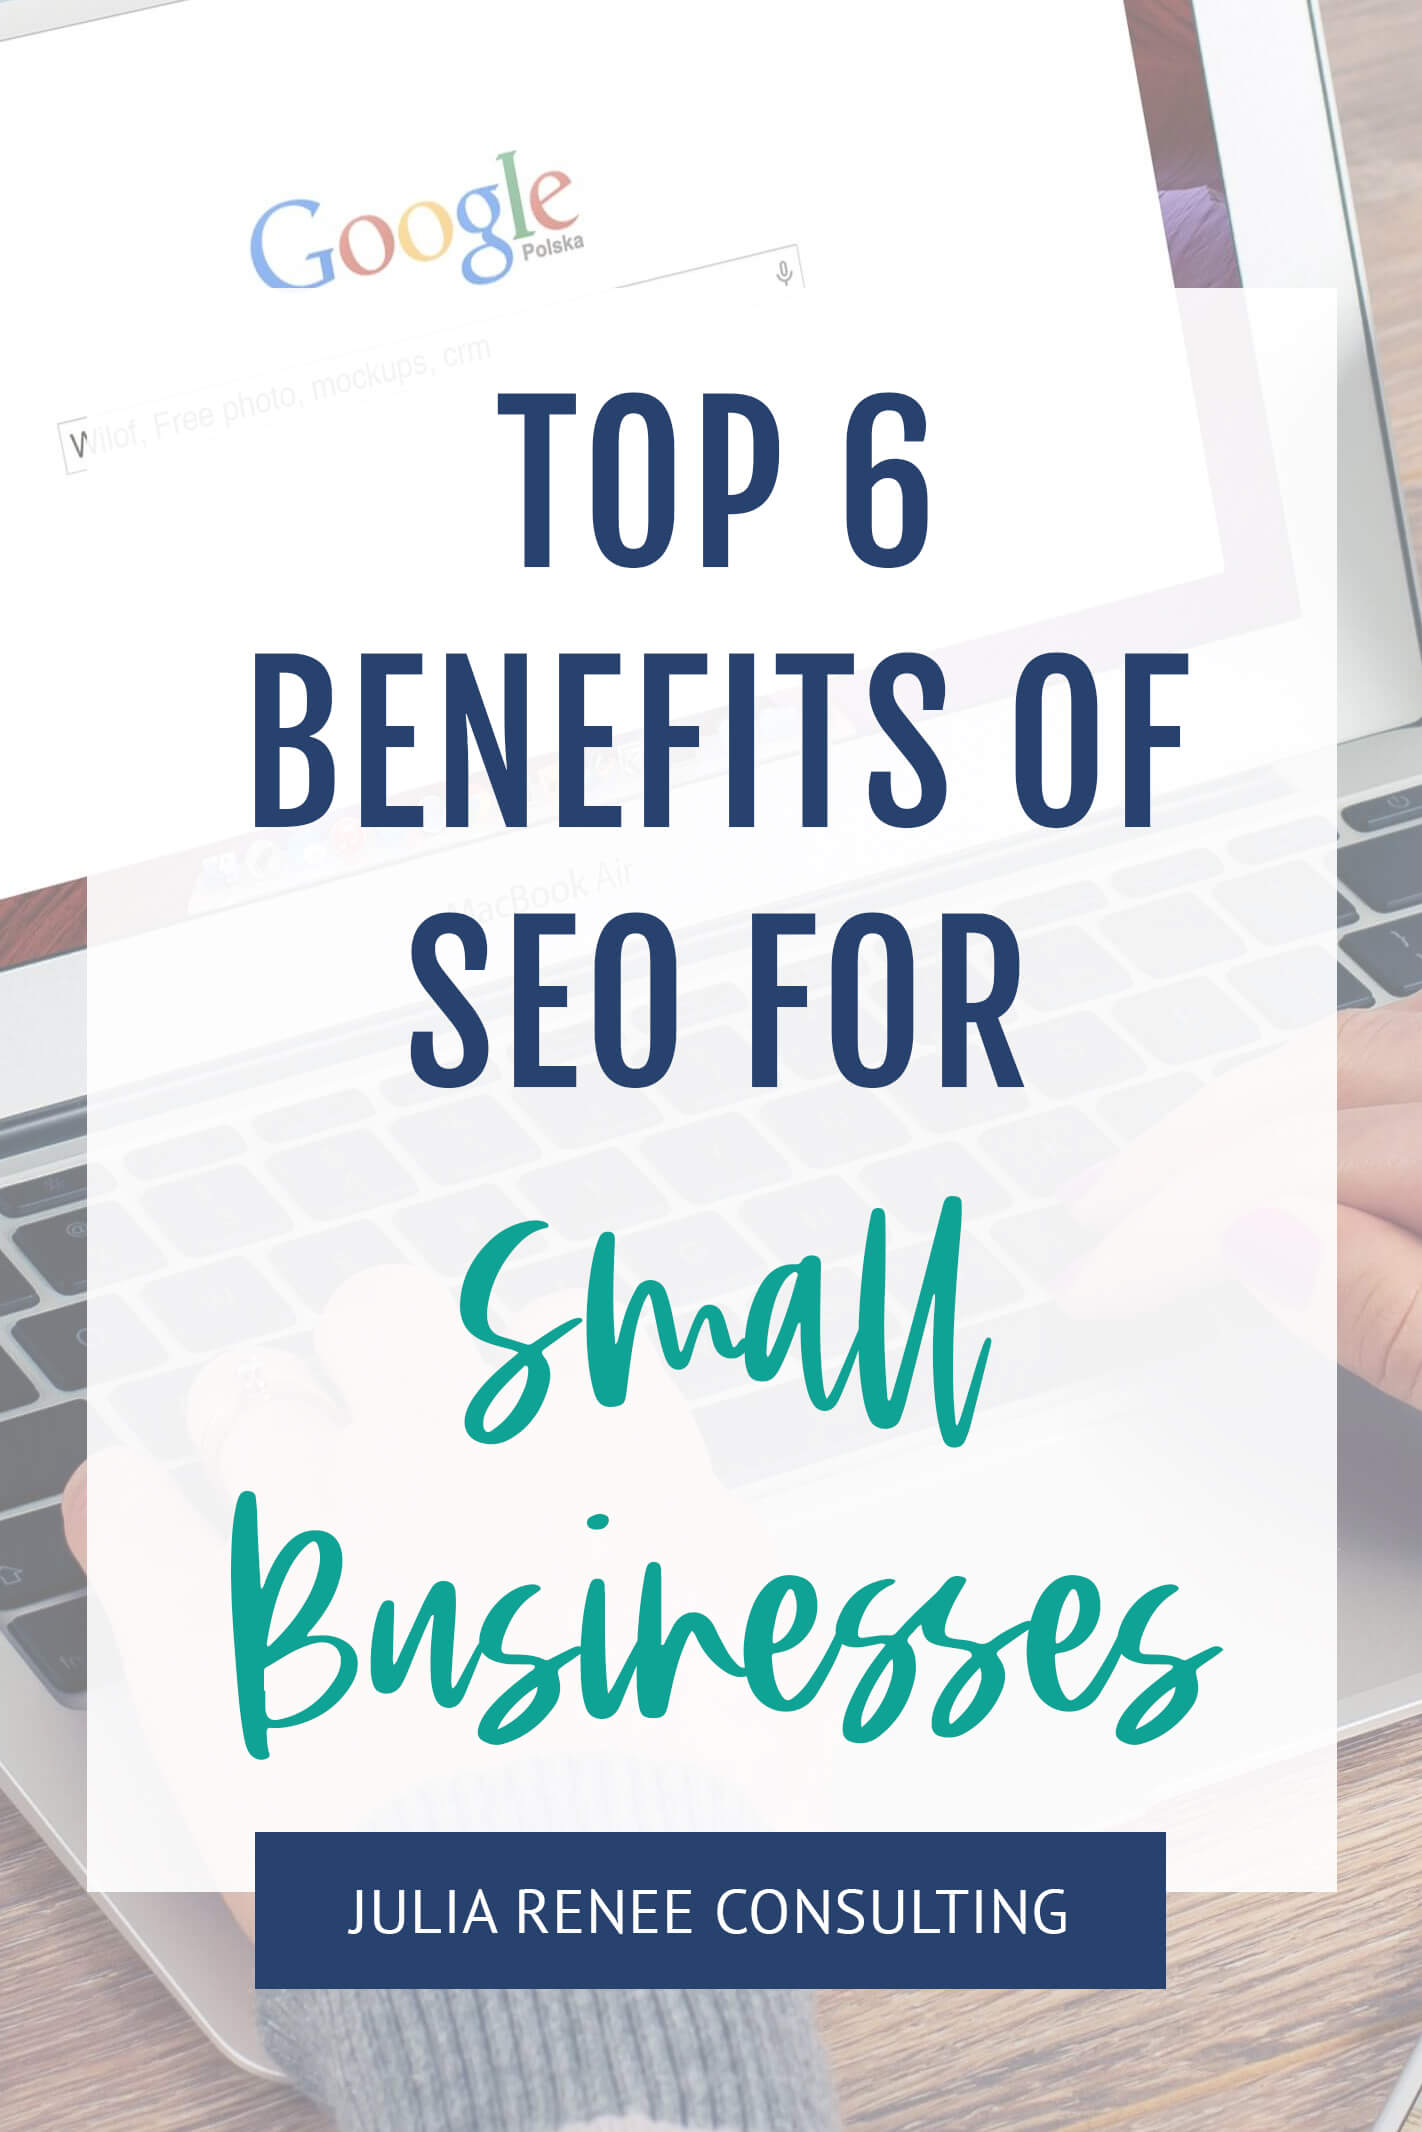 Top 6 Benefits of SEO for Small Businesses